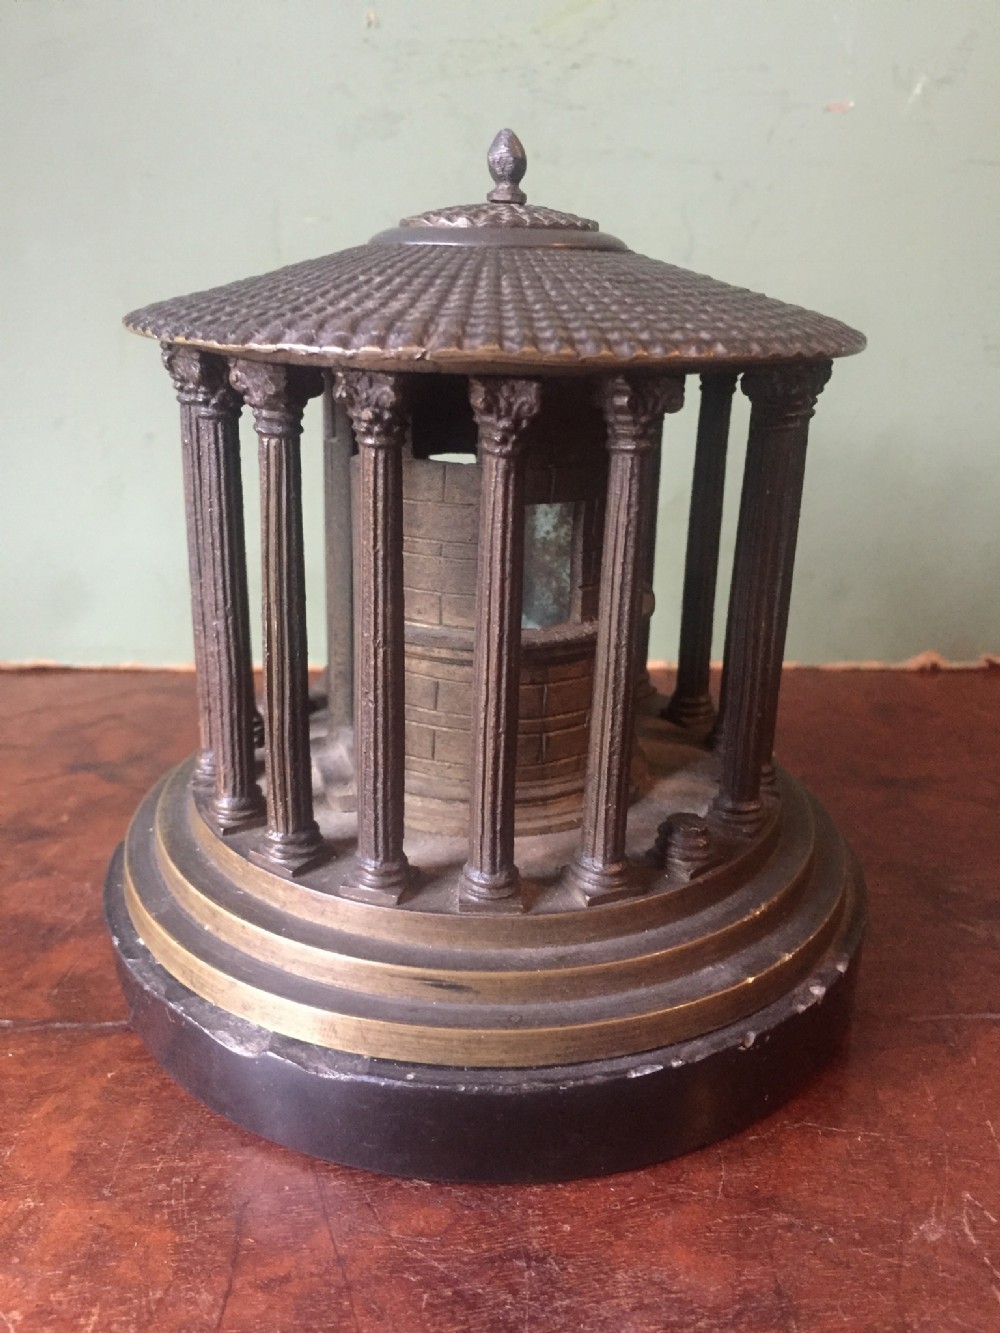 c19th italian bronze 'grand tour' souvenir architectural reduction model of the temple of hercules victor